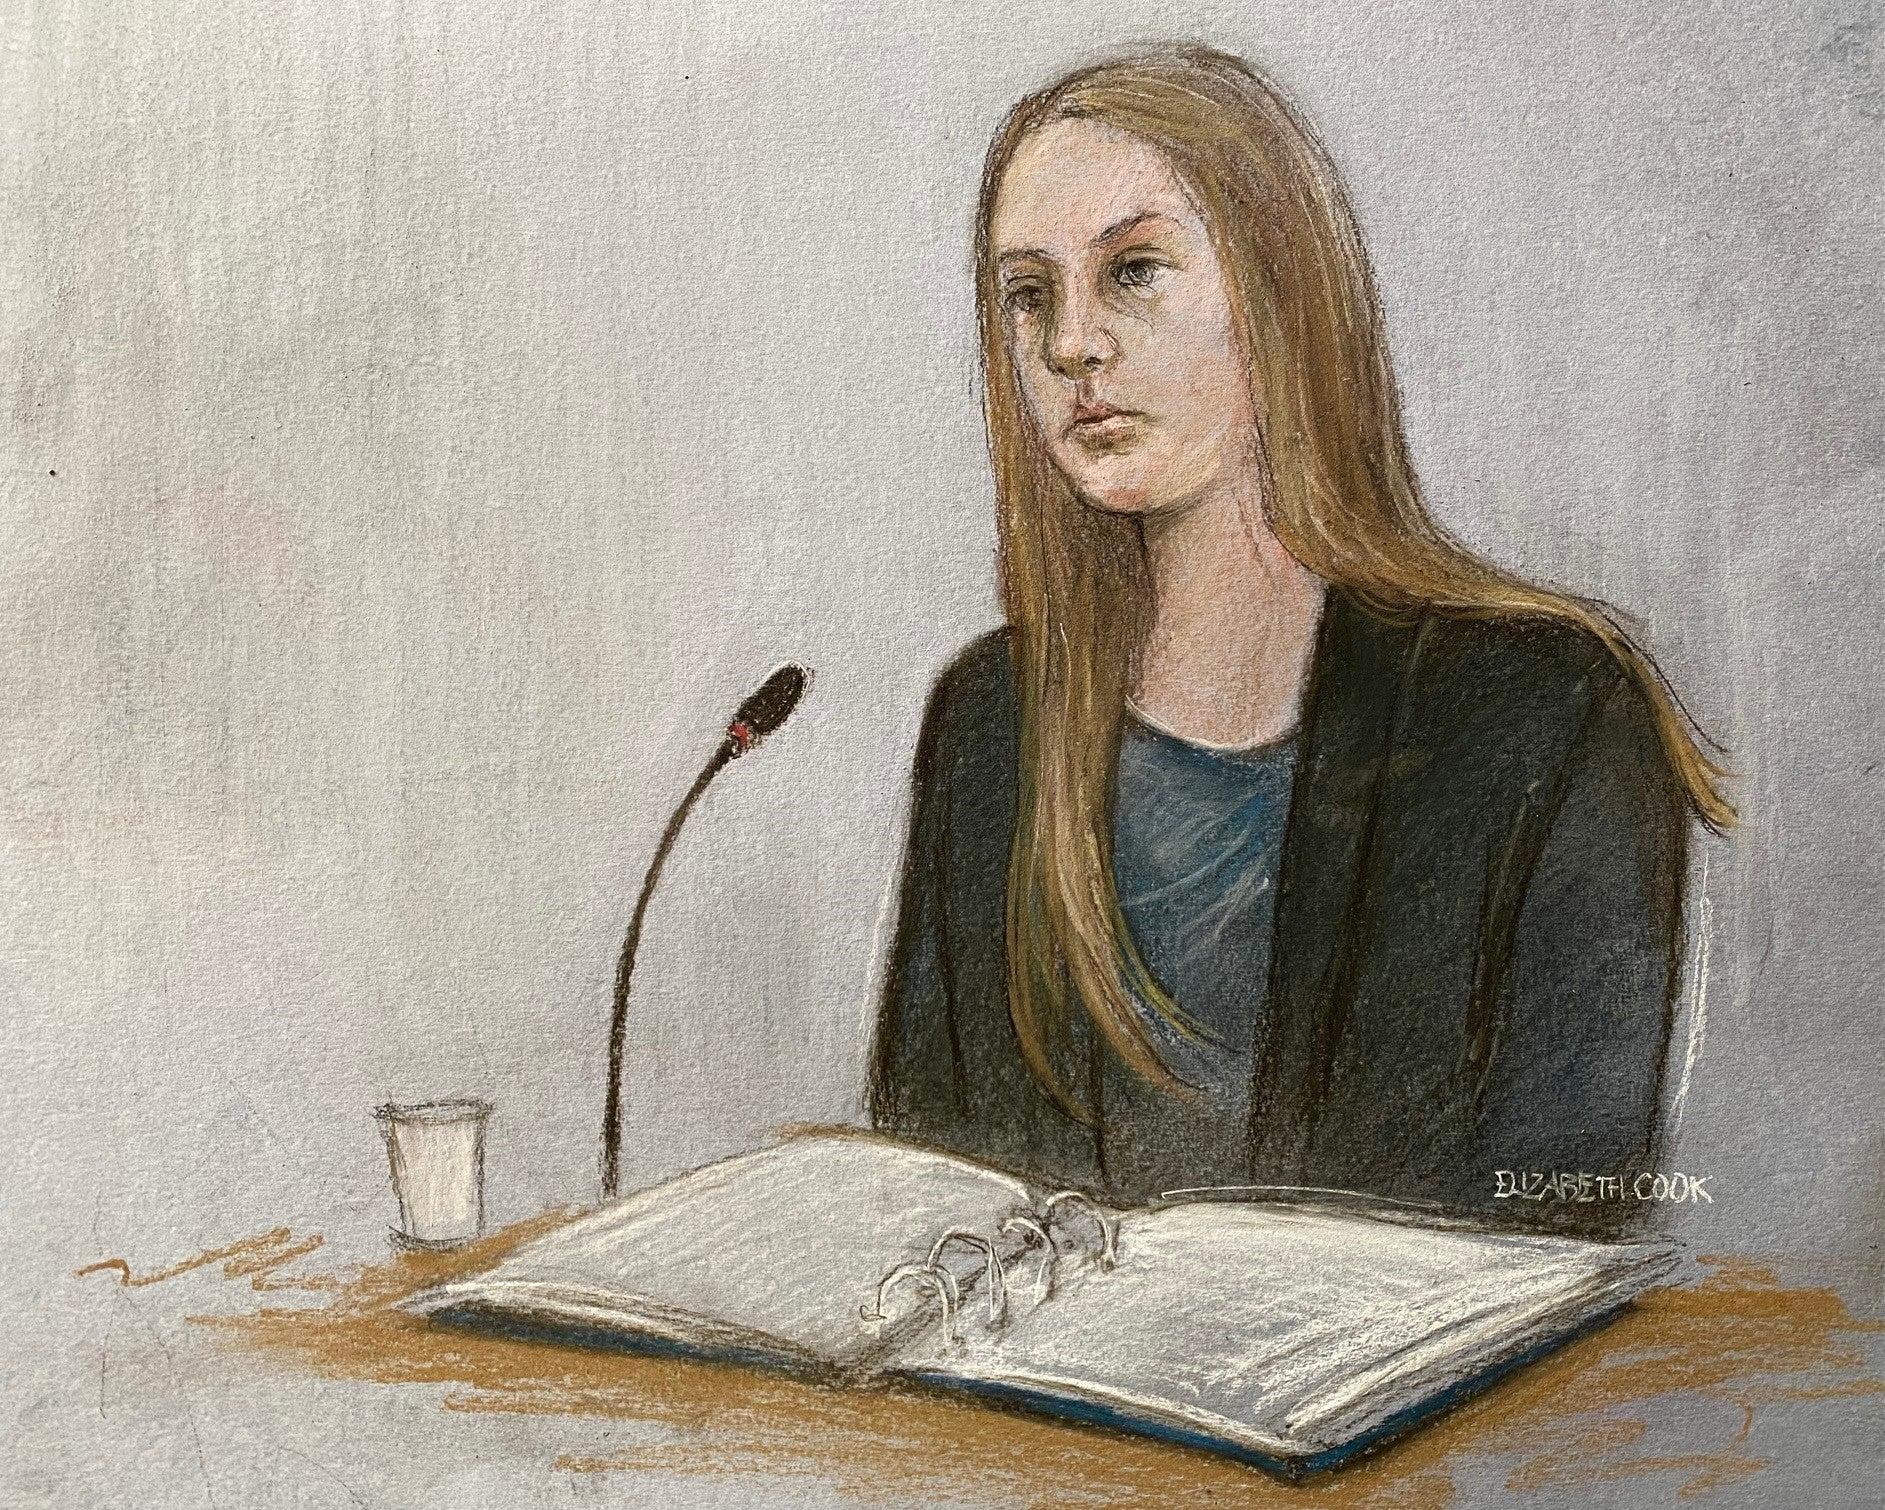 lucy letby, countess of chester hospital, child serial killer lucy letby guilty of attempting to murder premature baby